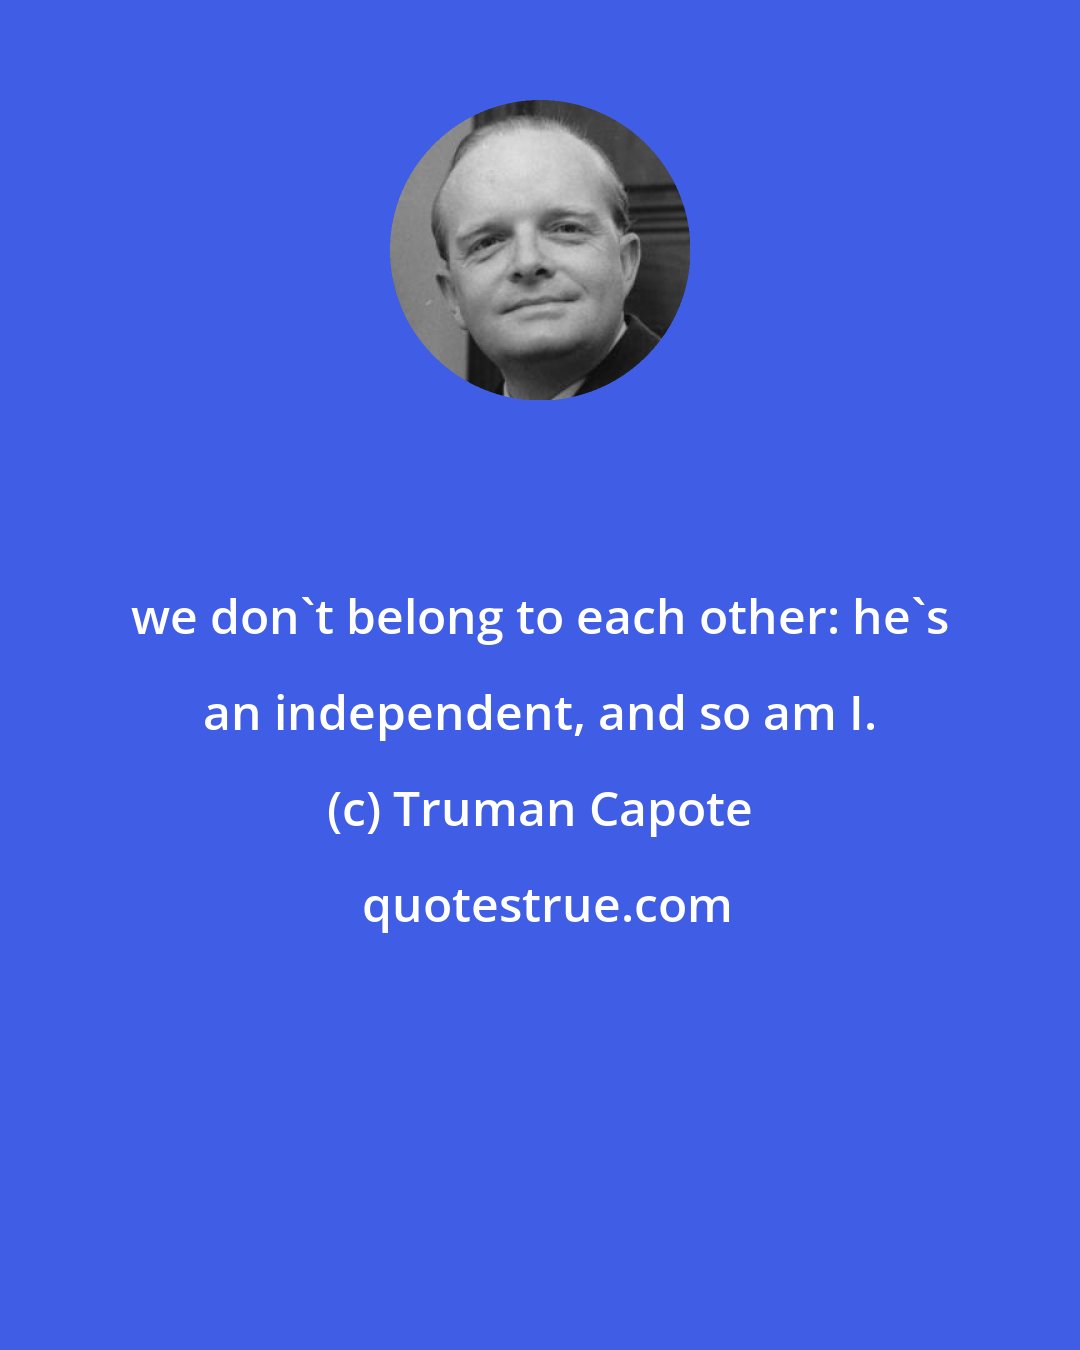 Truman Capote: we don't belong to each other: he's an independent, and so am I.